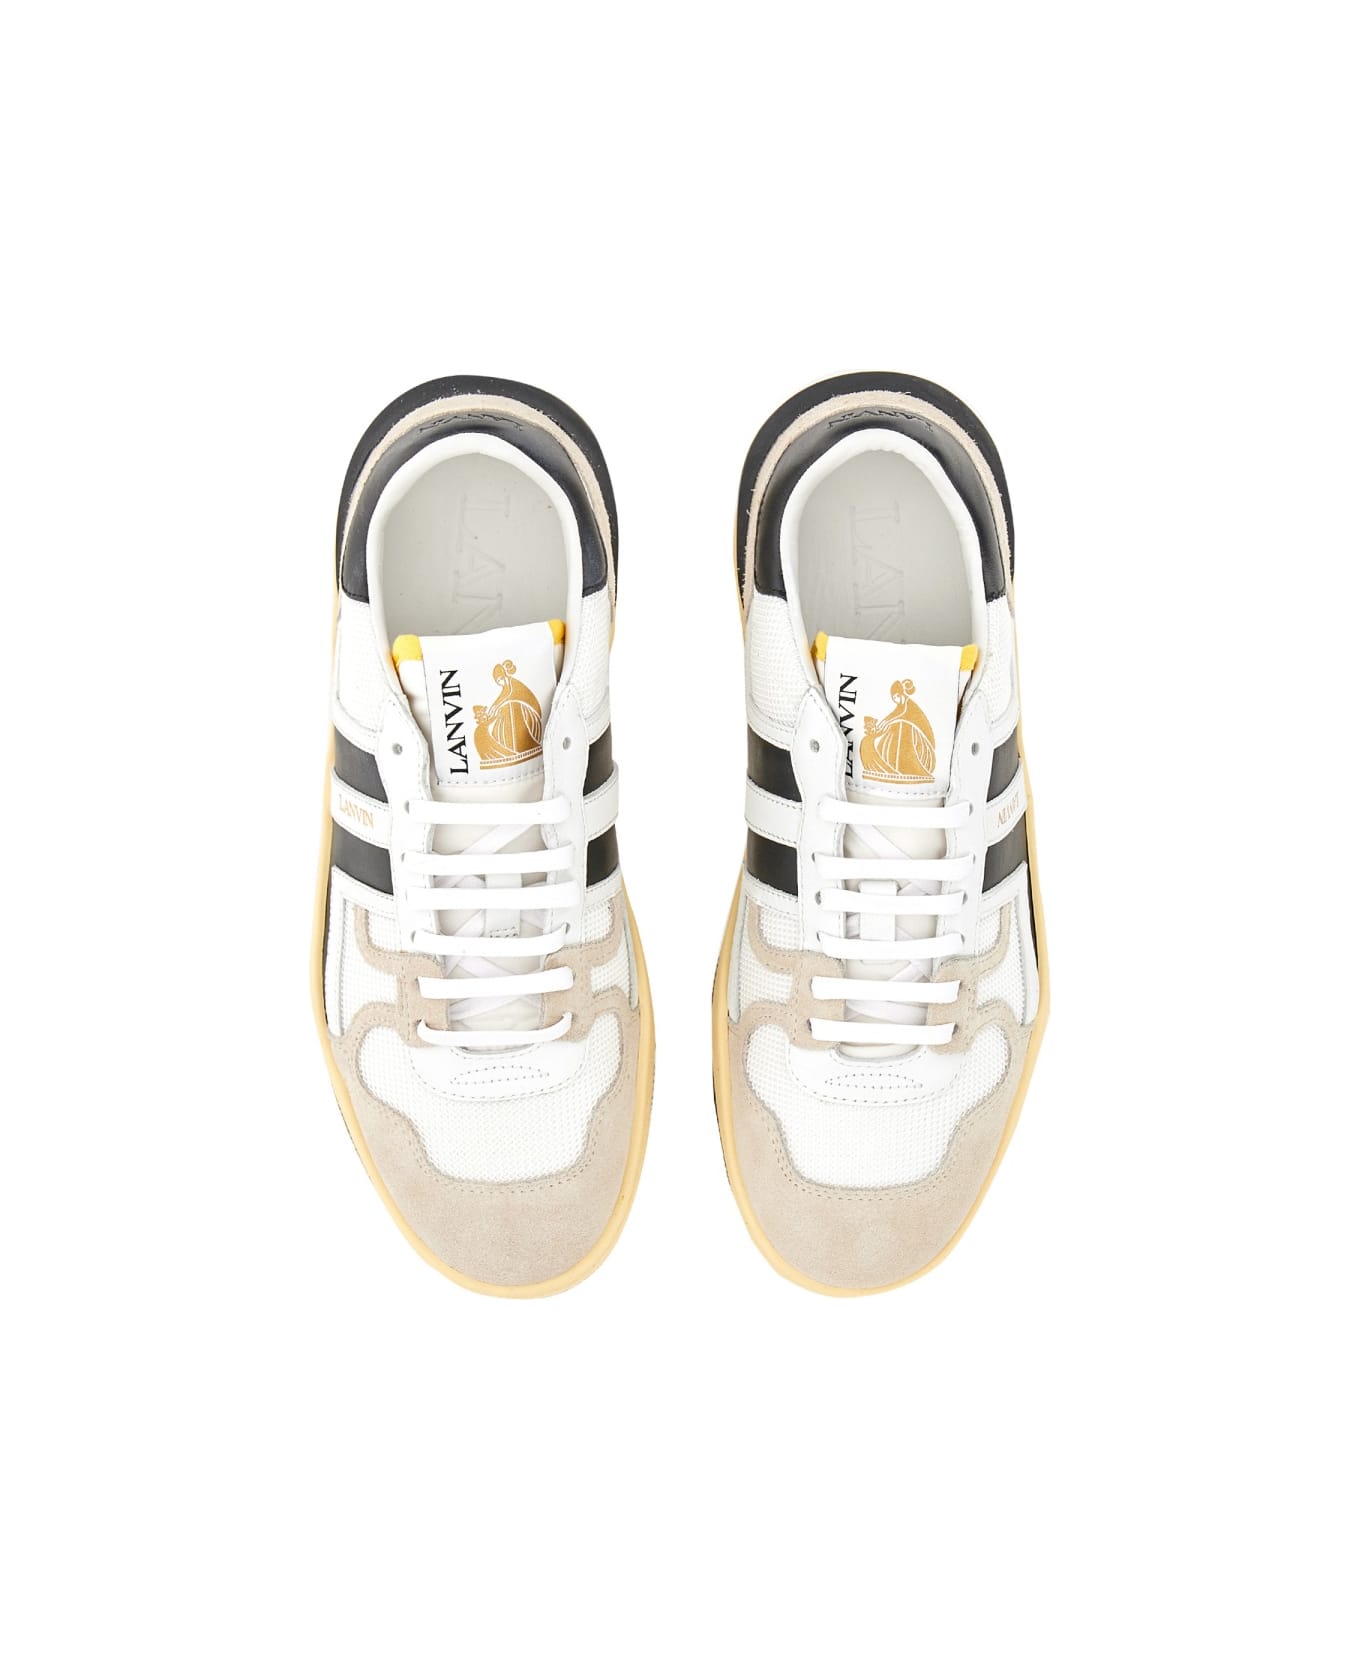 Lanvin Mesh, Suede And Nappa Leather Sneaker - WHITE